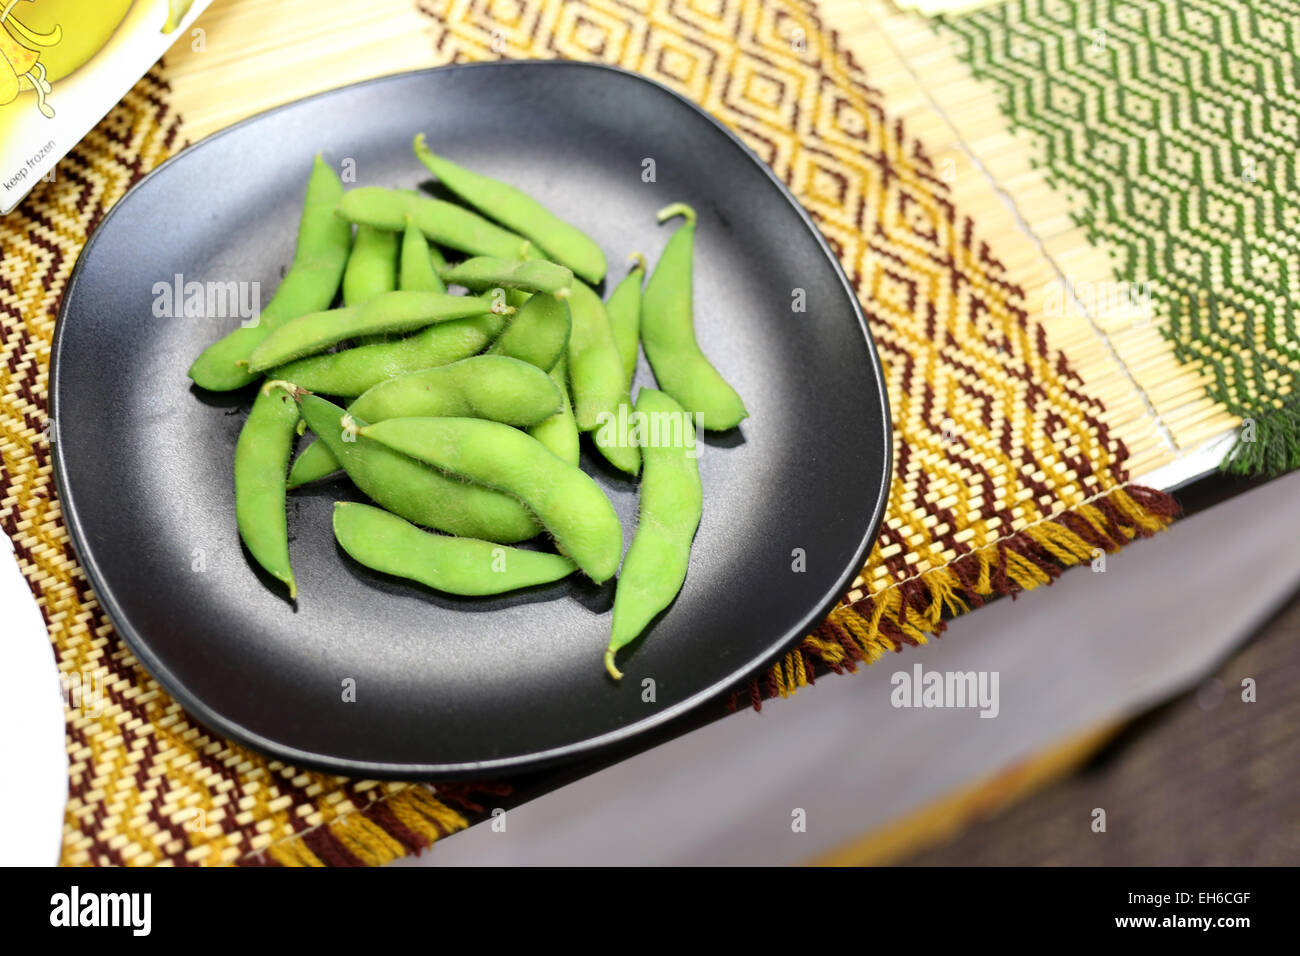 Vegetables of green beans on dish in a restaurant. Stock Photo